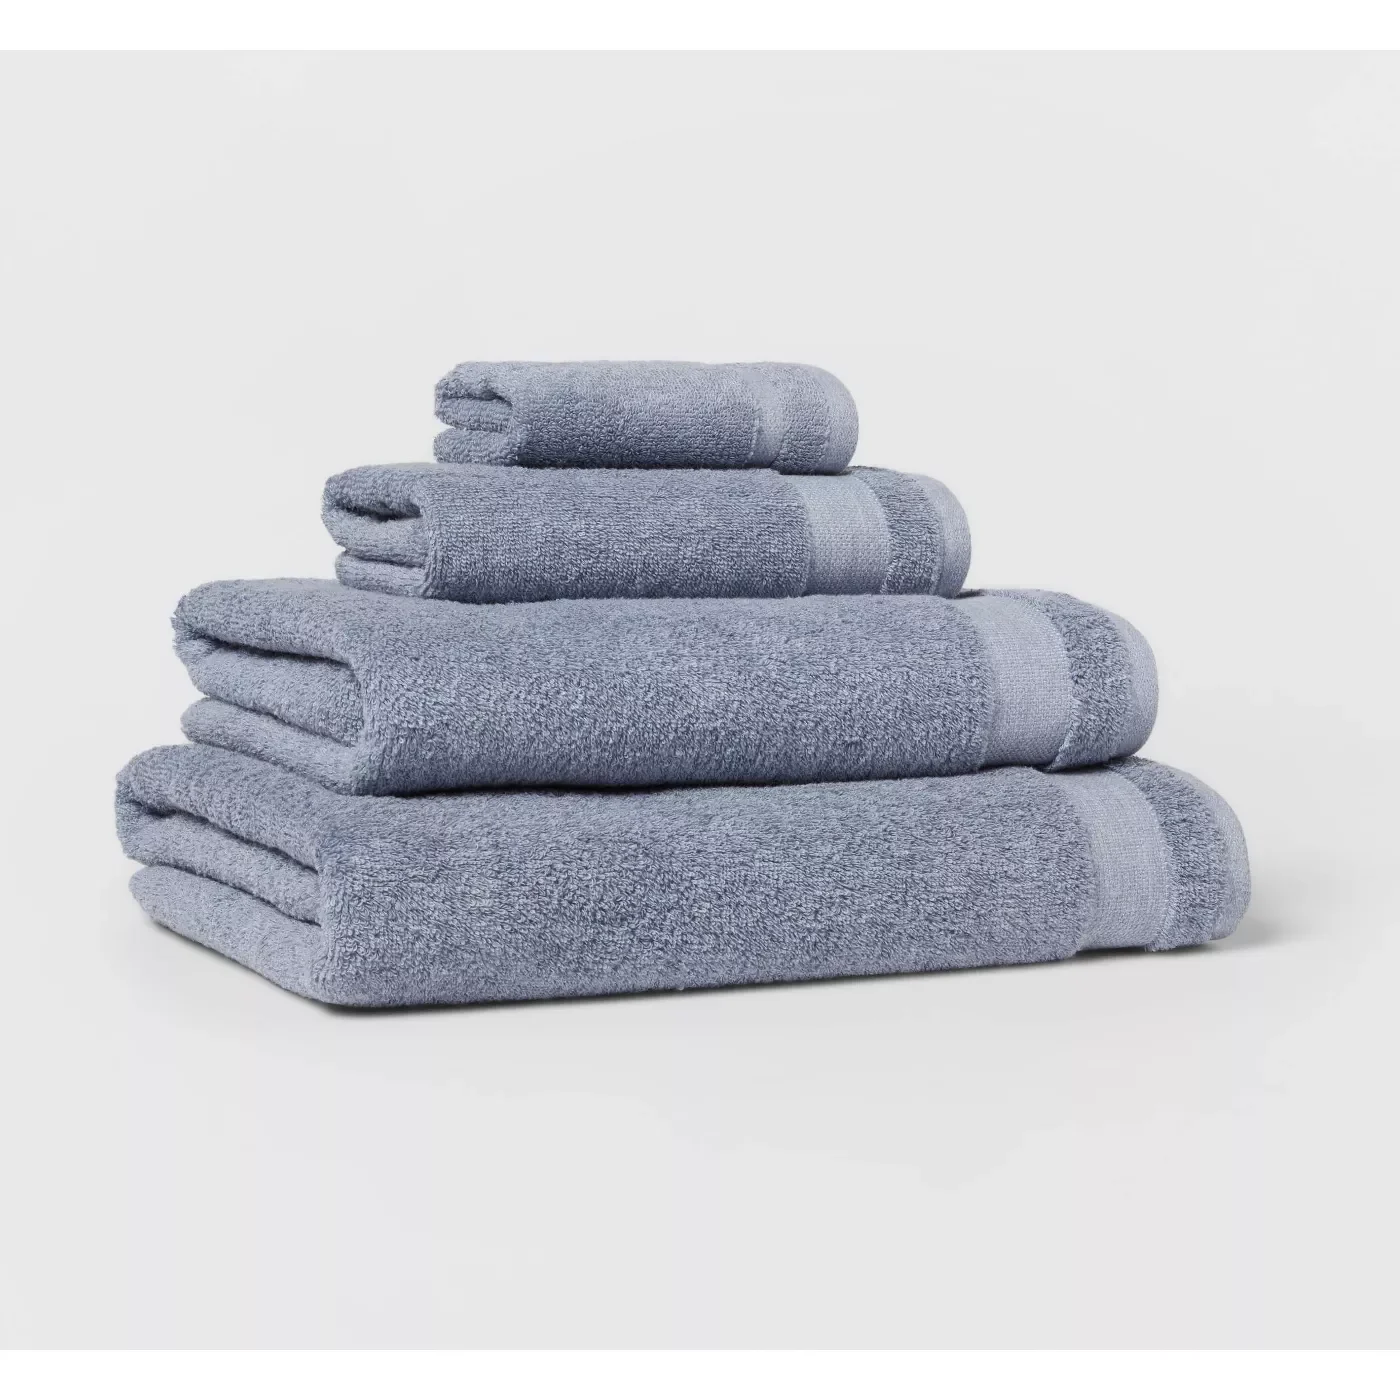 10 Best Cheap Towels for Your Bathroom: Compare, Buy & Save (2019)